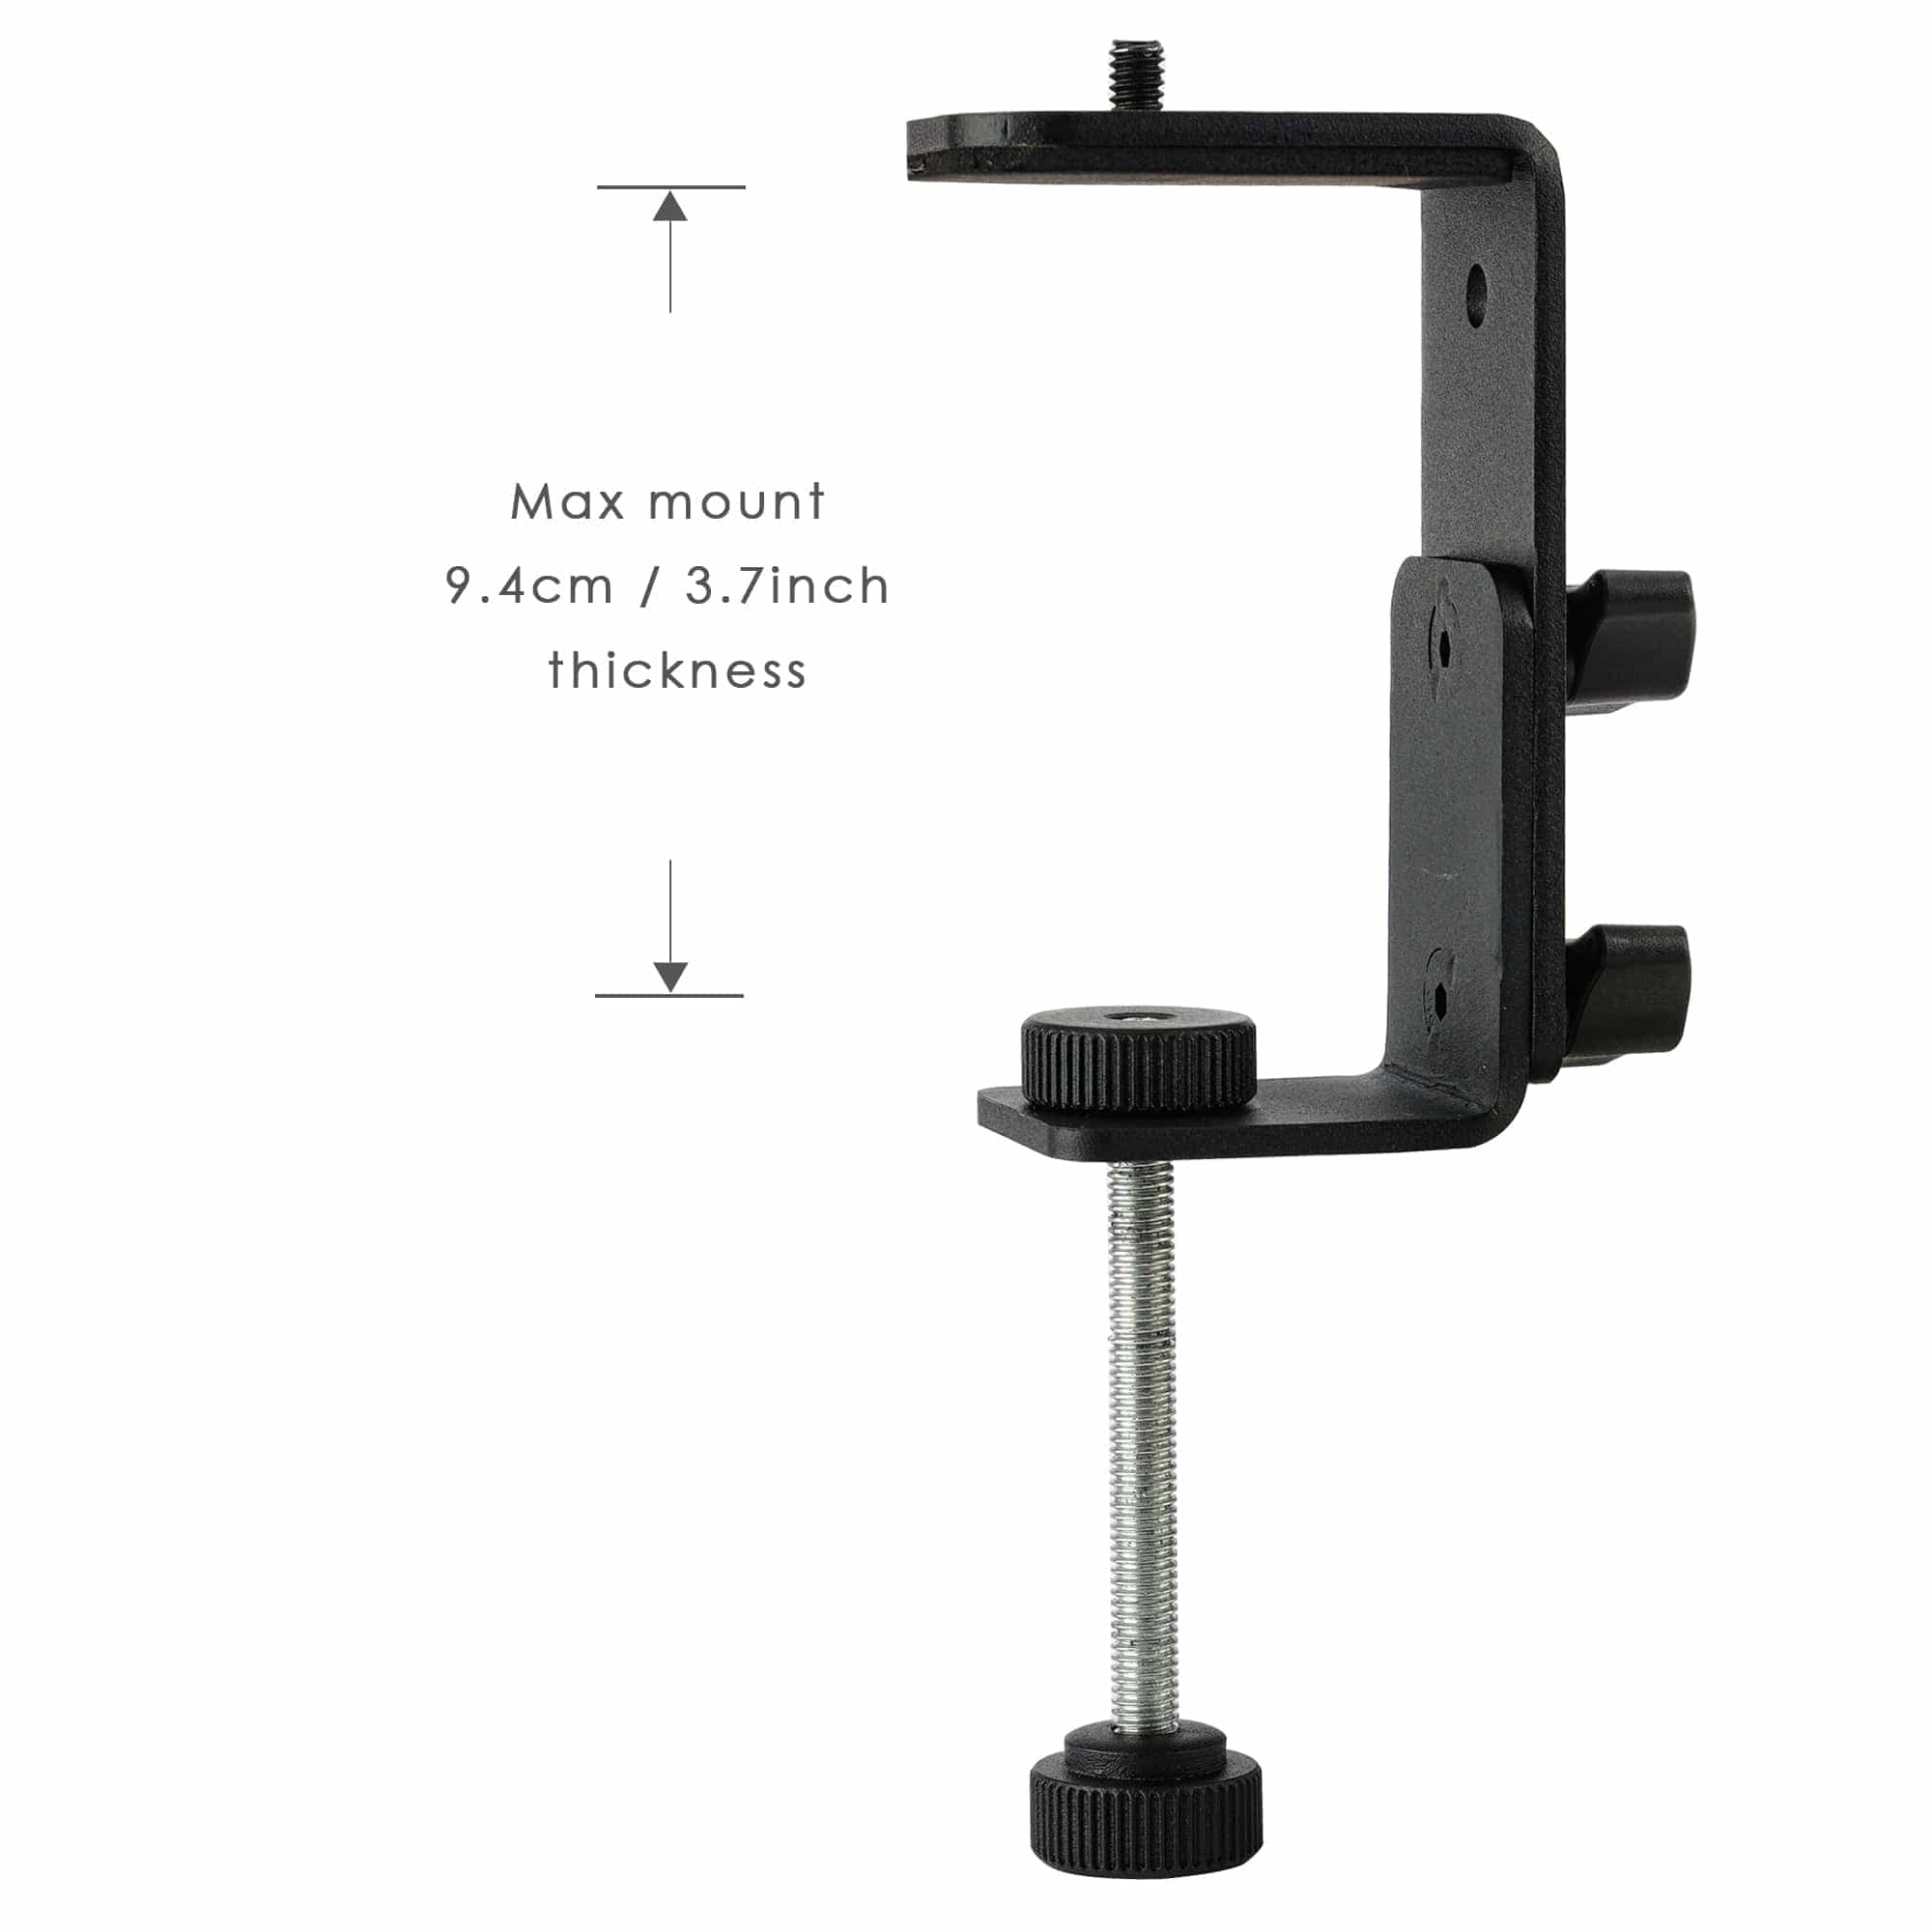 POWRIG conference light gears Desk stand mount for video light and camera